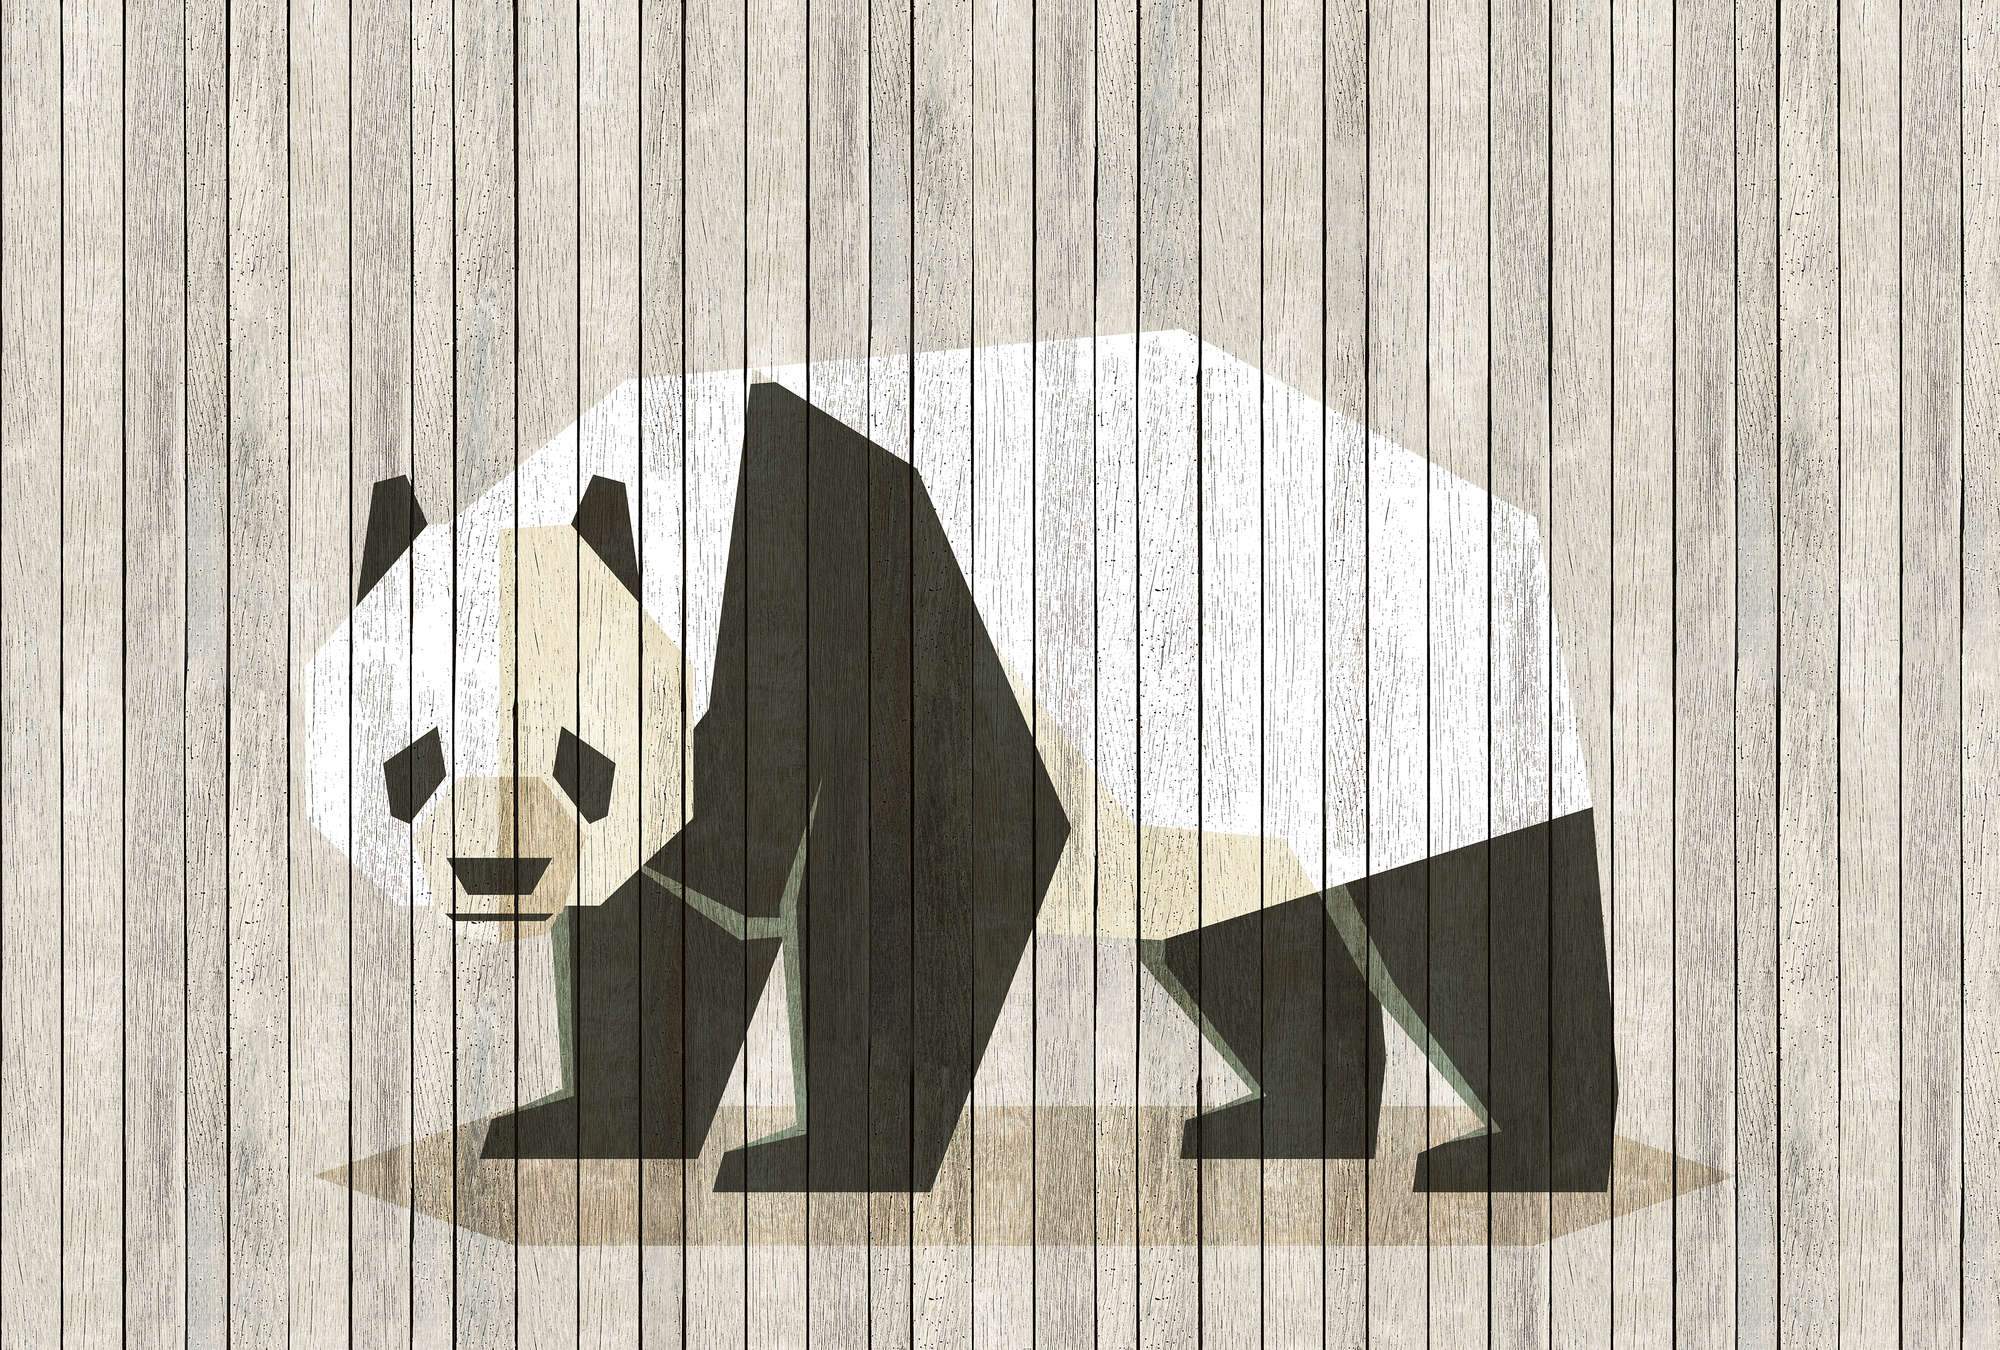             Born to Be Wild 2 - Photo wallpaper on wood panel structure with panda & board wall - Beige, Brown | Structure non-woven
        